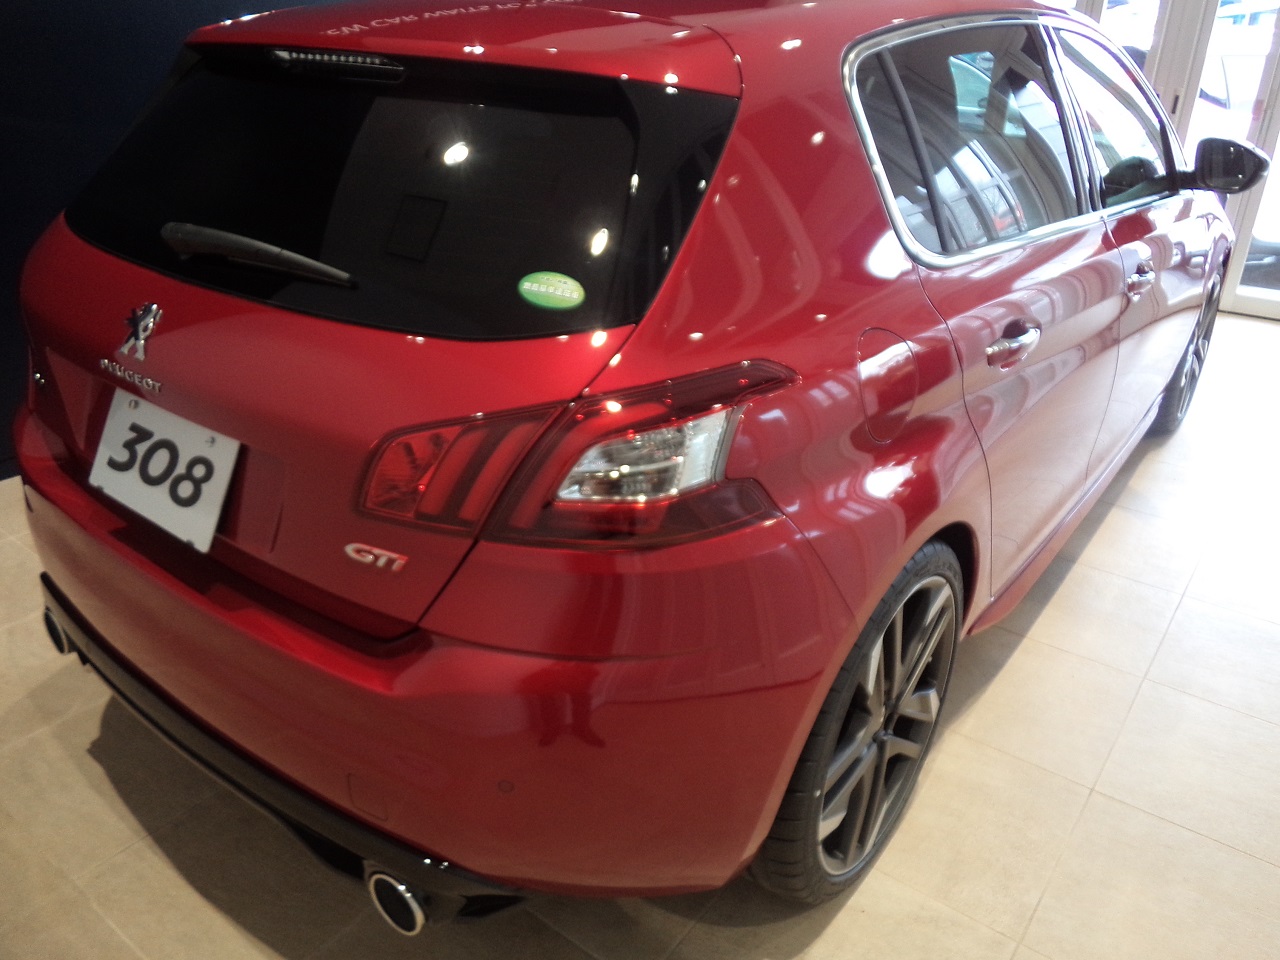 308 GTi 270 by PEUGEOT SPORT　期間限定展示！！